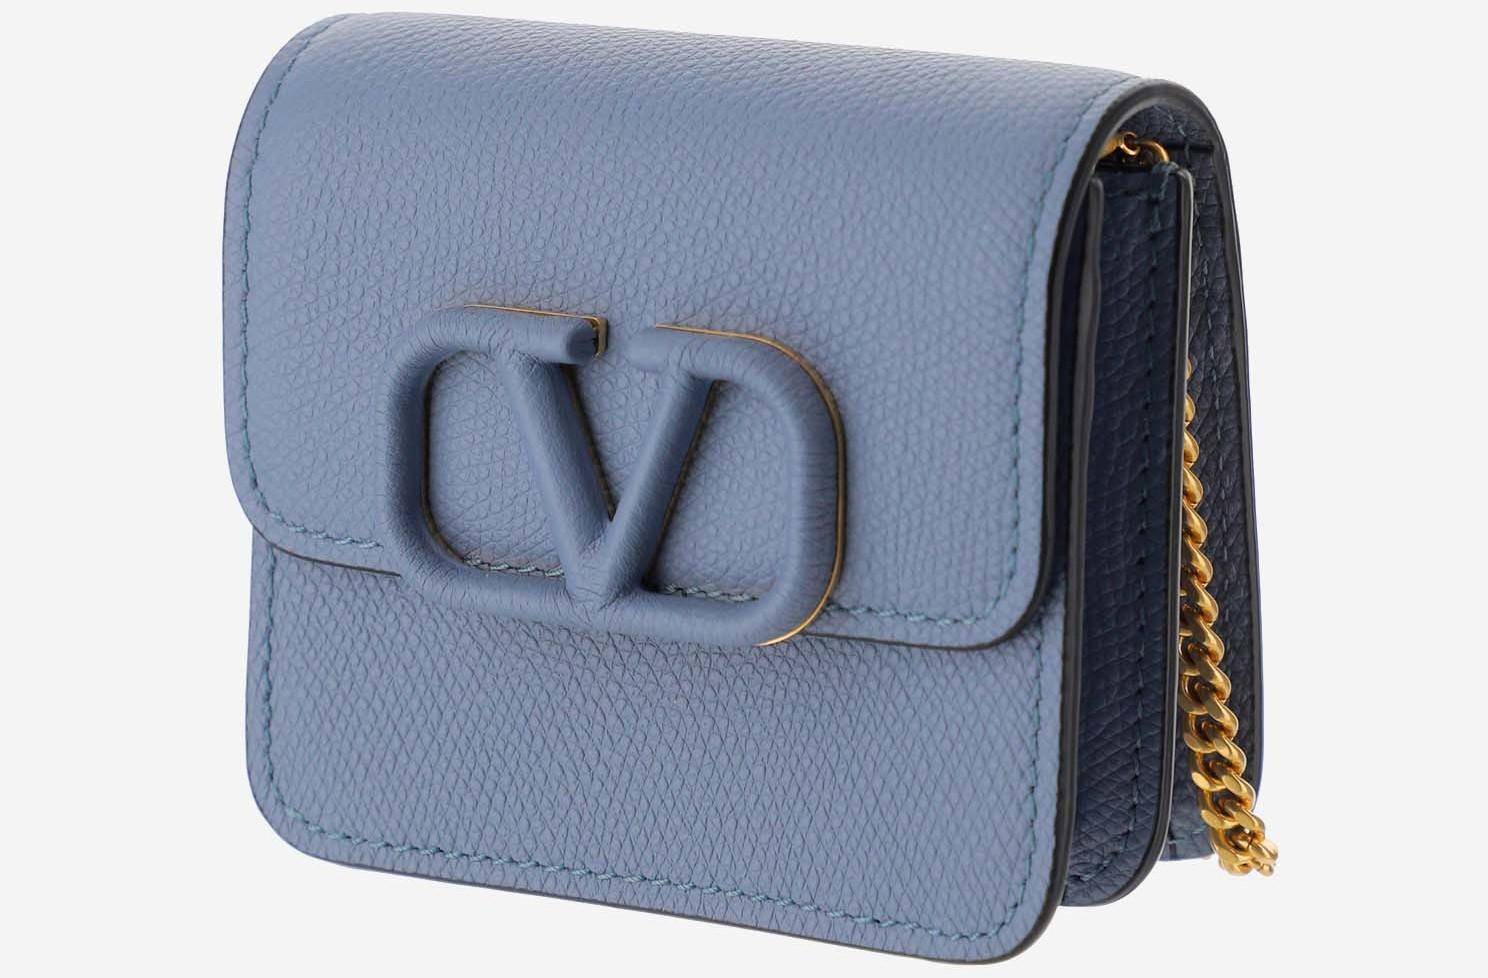 Vlogo Signature Grainy Calfskin Wallet With Chain by Valentino